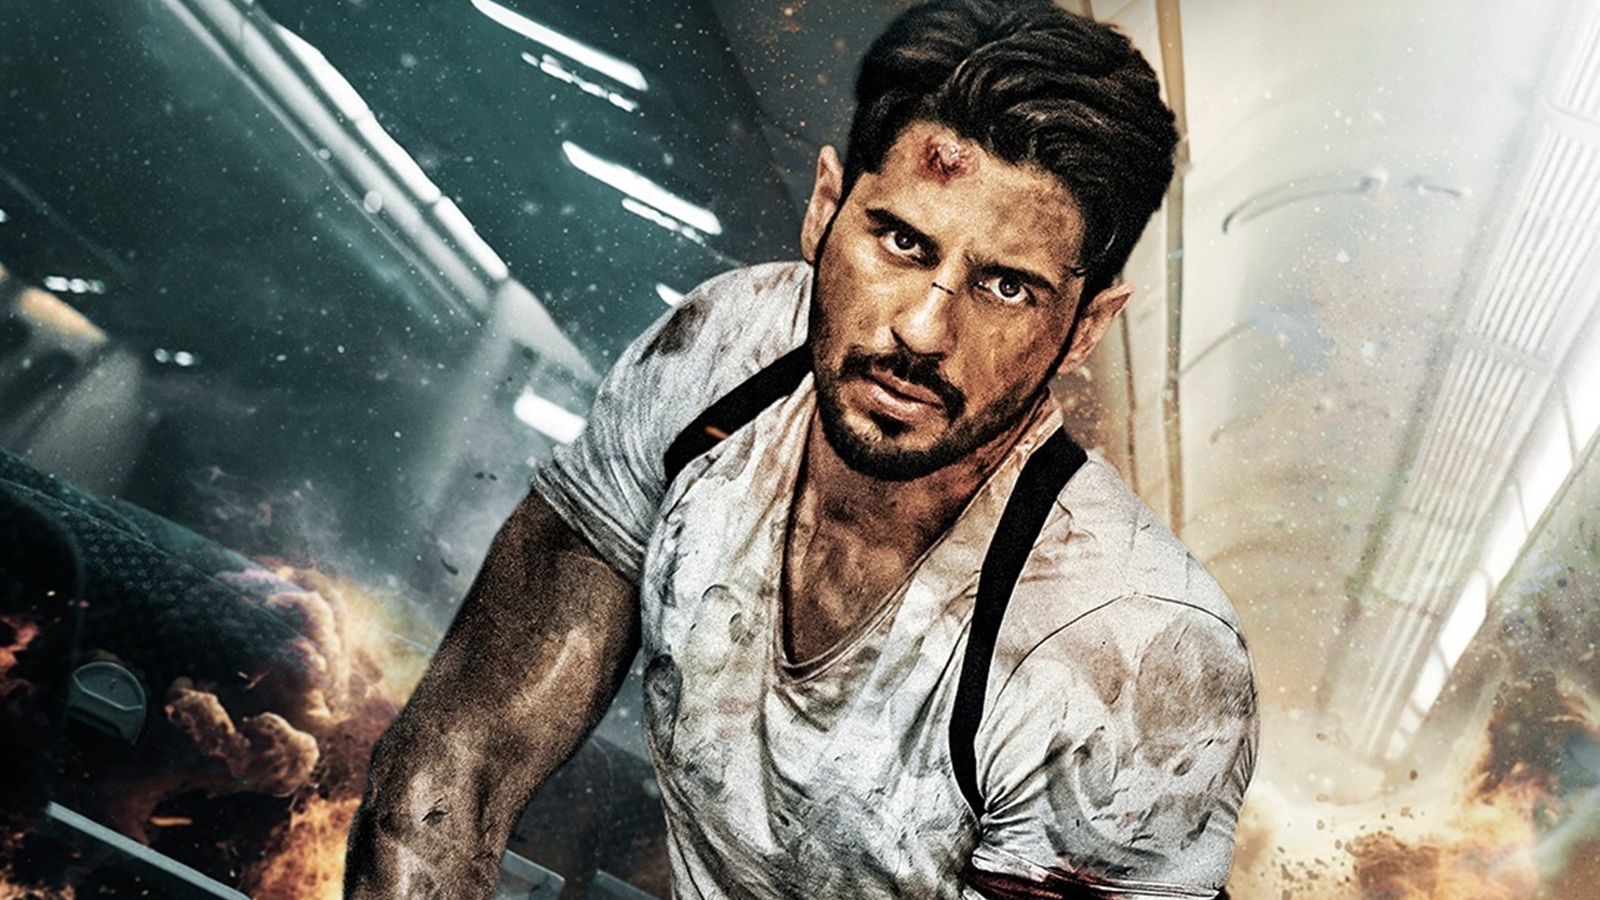 android, yodha box office collection day 3: sidharth malhotra’s actioner earns rs 12.75 cr in opening weekend; faces stiff competition from shaitaan